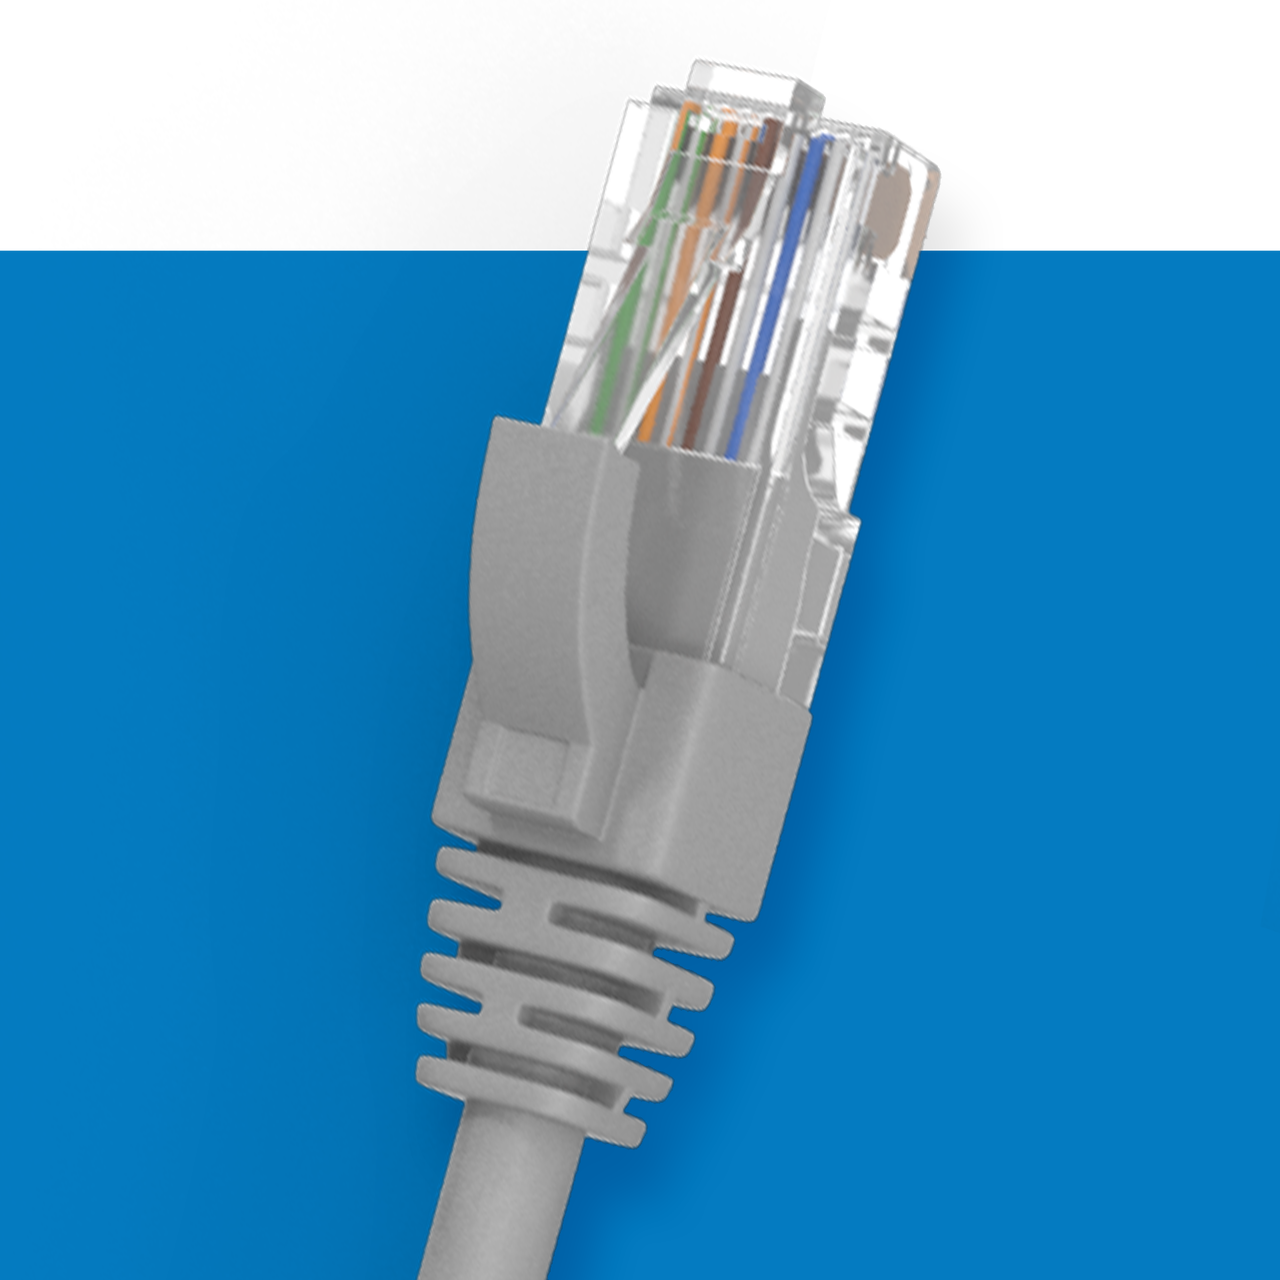 Modular cable on a blue background